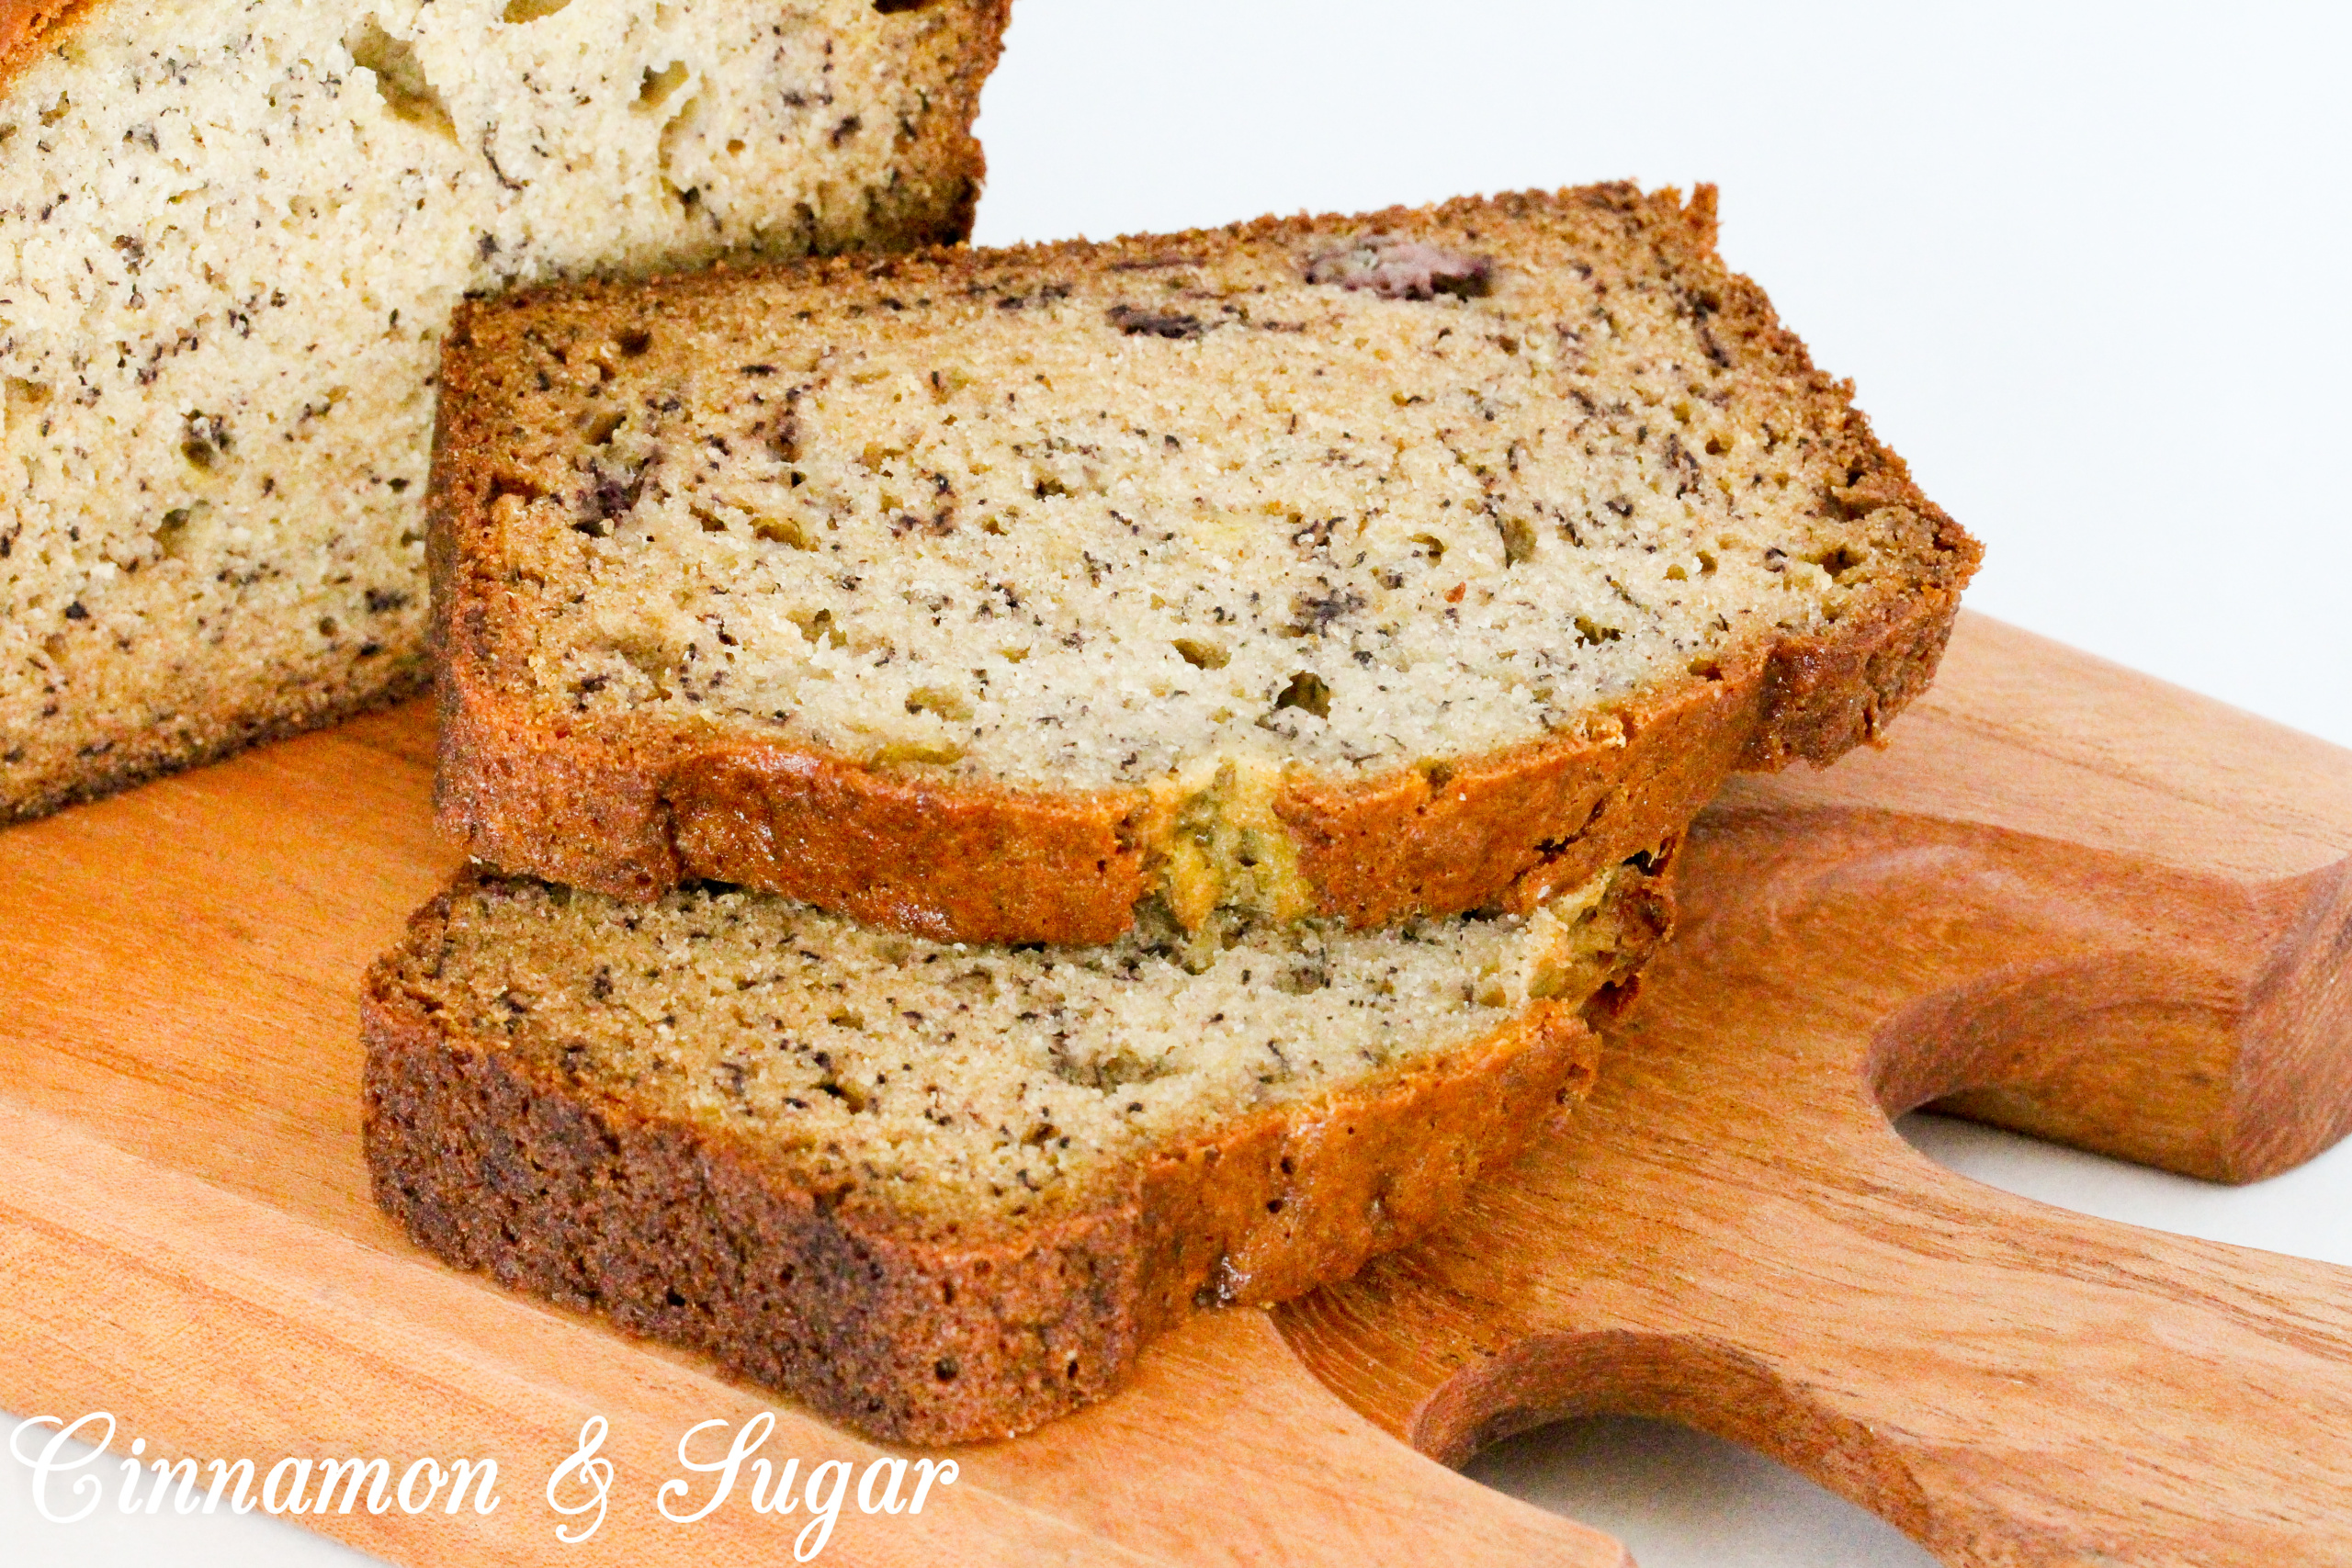 Hilda's No-Fail Banana Bread is quick and easy to mix up since a fork and bowls are the only equipment required. It doesn't take long for a sweet aroma to fill the air as the bread bakes and sliced warm with a pat of butter, this treat will hit the spot! Recipe shared with permission granted by Mary Lee Ashford, author of THE QUICHE OF DEATH.